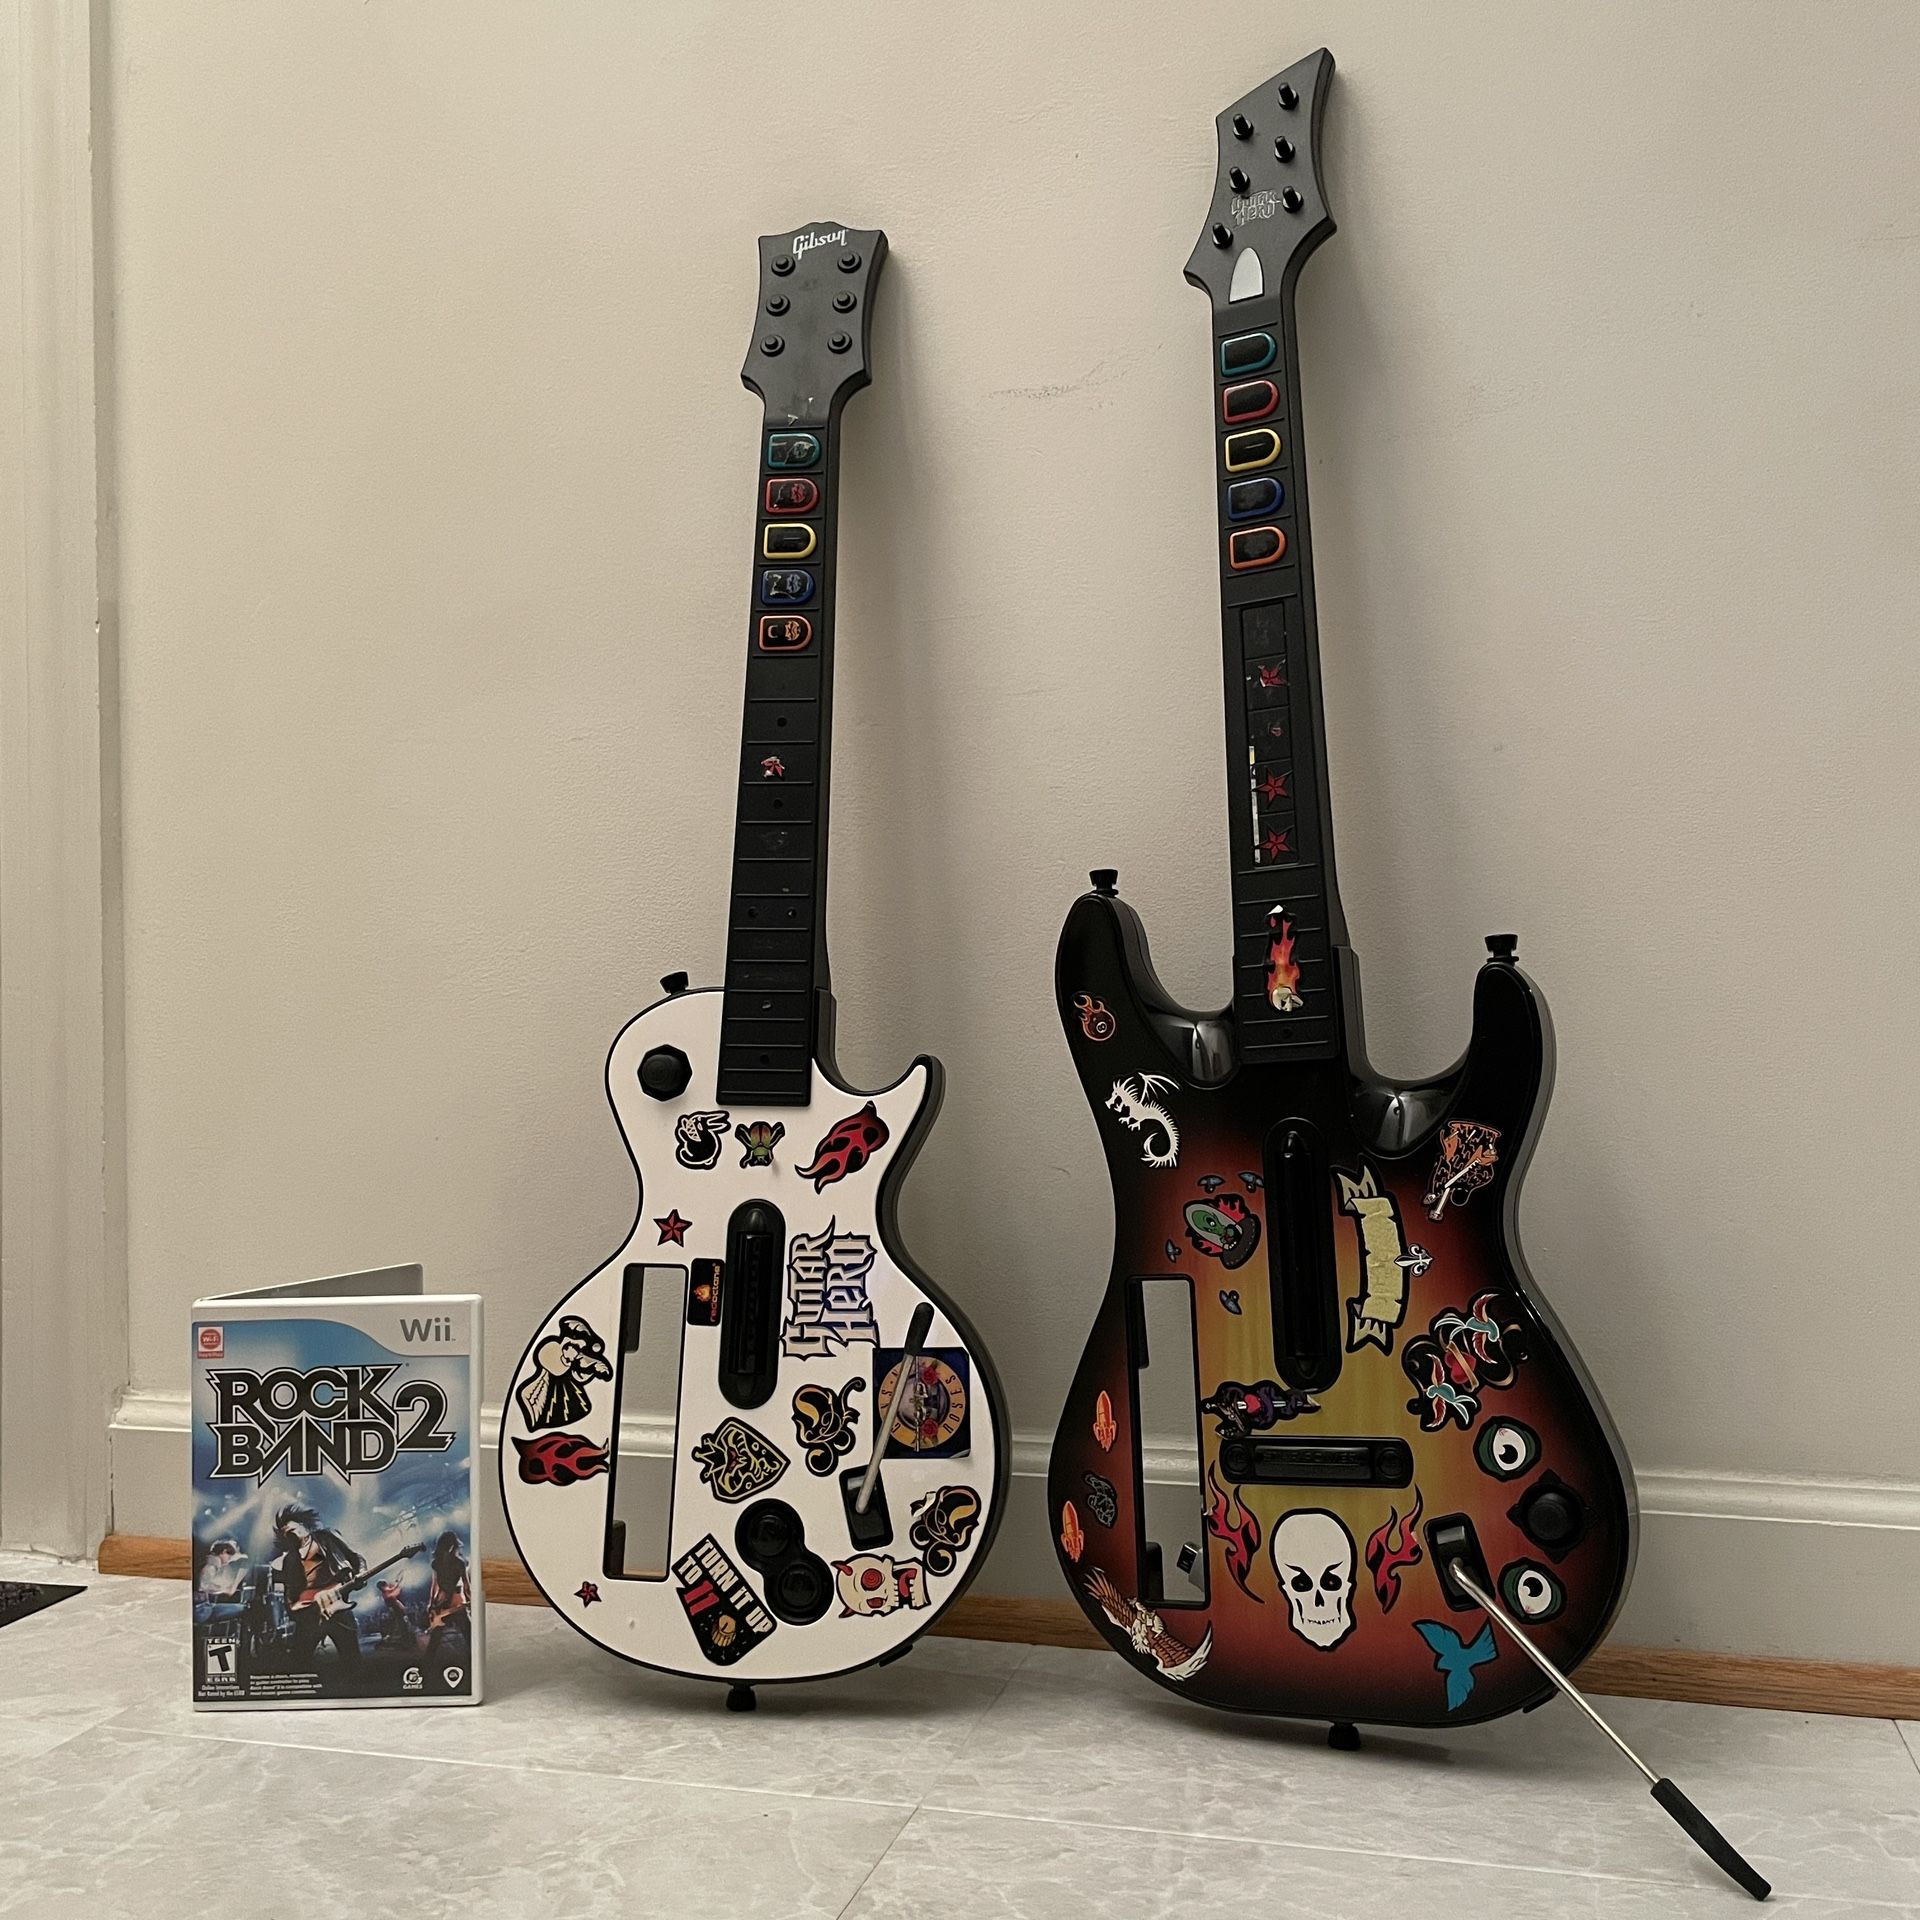 Guitar Hero Nintendo Wii With Rock Band 2 Video Game Accessory Accessories Gaming Rock for Sale in Burtonsville, MD - OfferUp